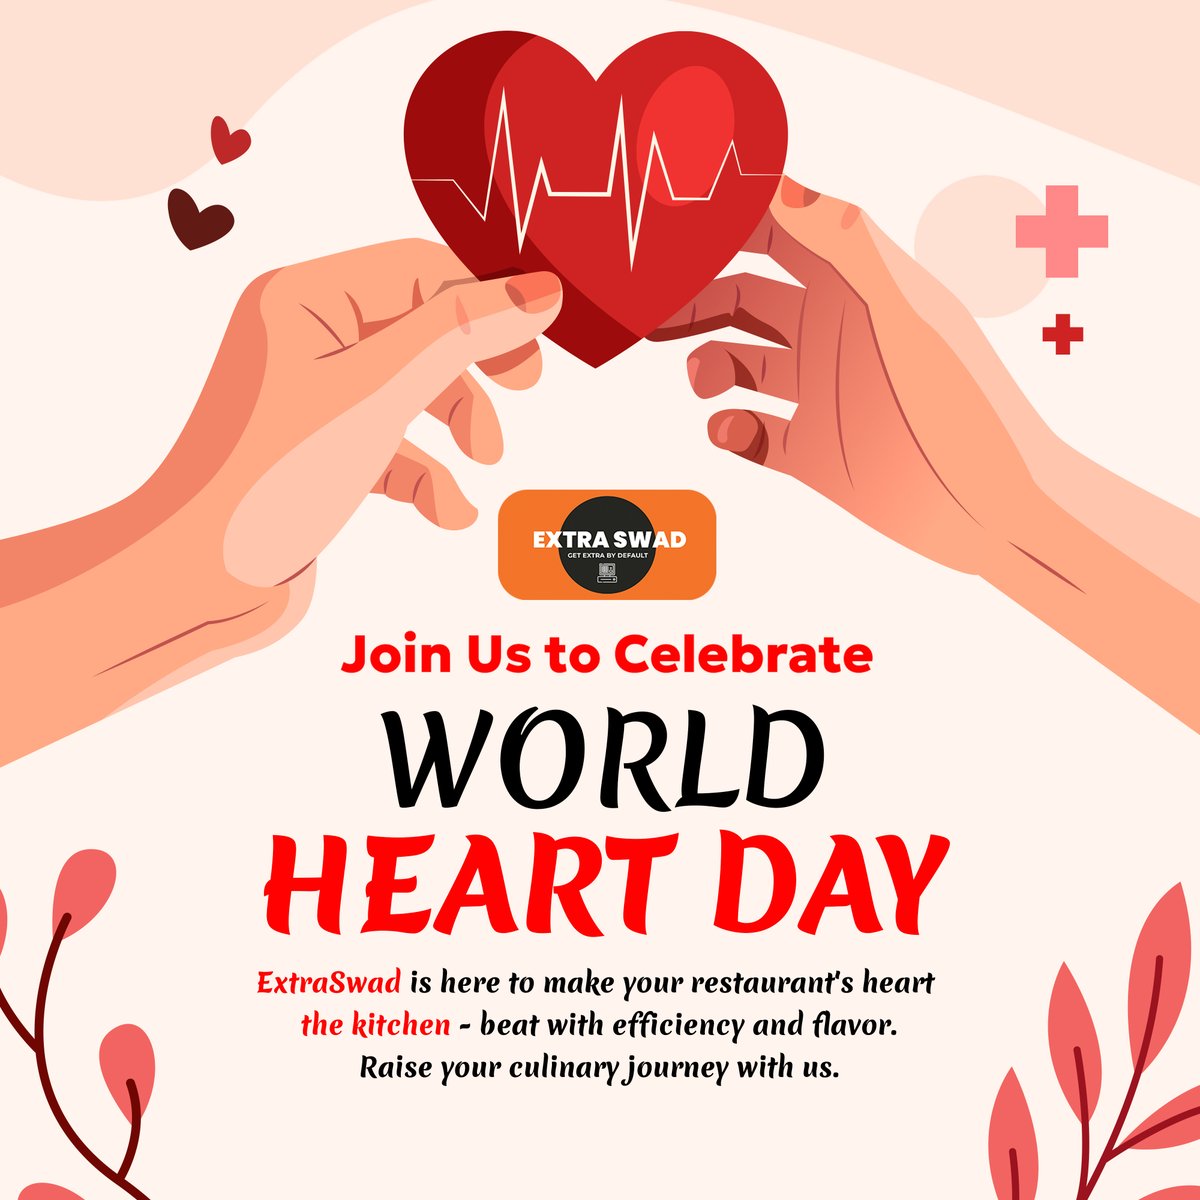 🫀 This World Heart Day, let ExtraSwad be your recipe for a healthy restaurant business. Streamline, optimize, and flourish. Your heart, our commitment. ❤️
#WorldHeartDay #ExtraSwad #HealthyBusiness
.
.
.
#Efficiency #FoodTech #Prosperity #innovations #BillingSoftware #smartwork